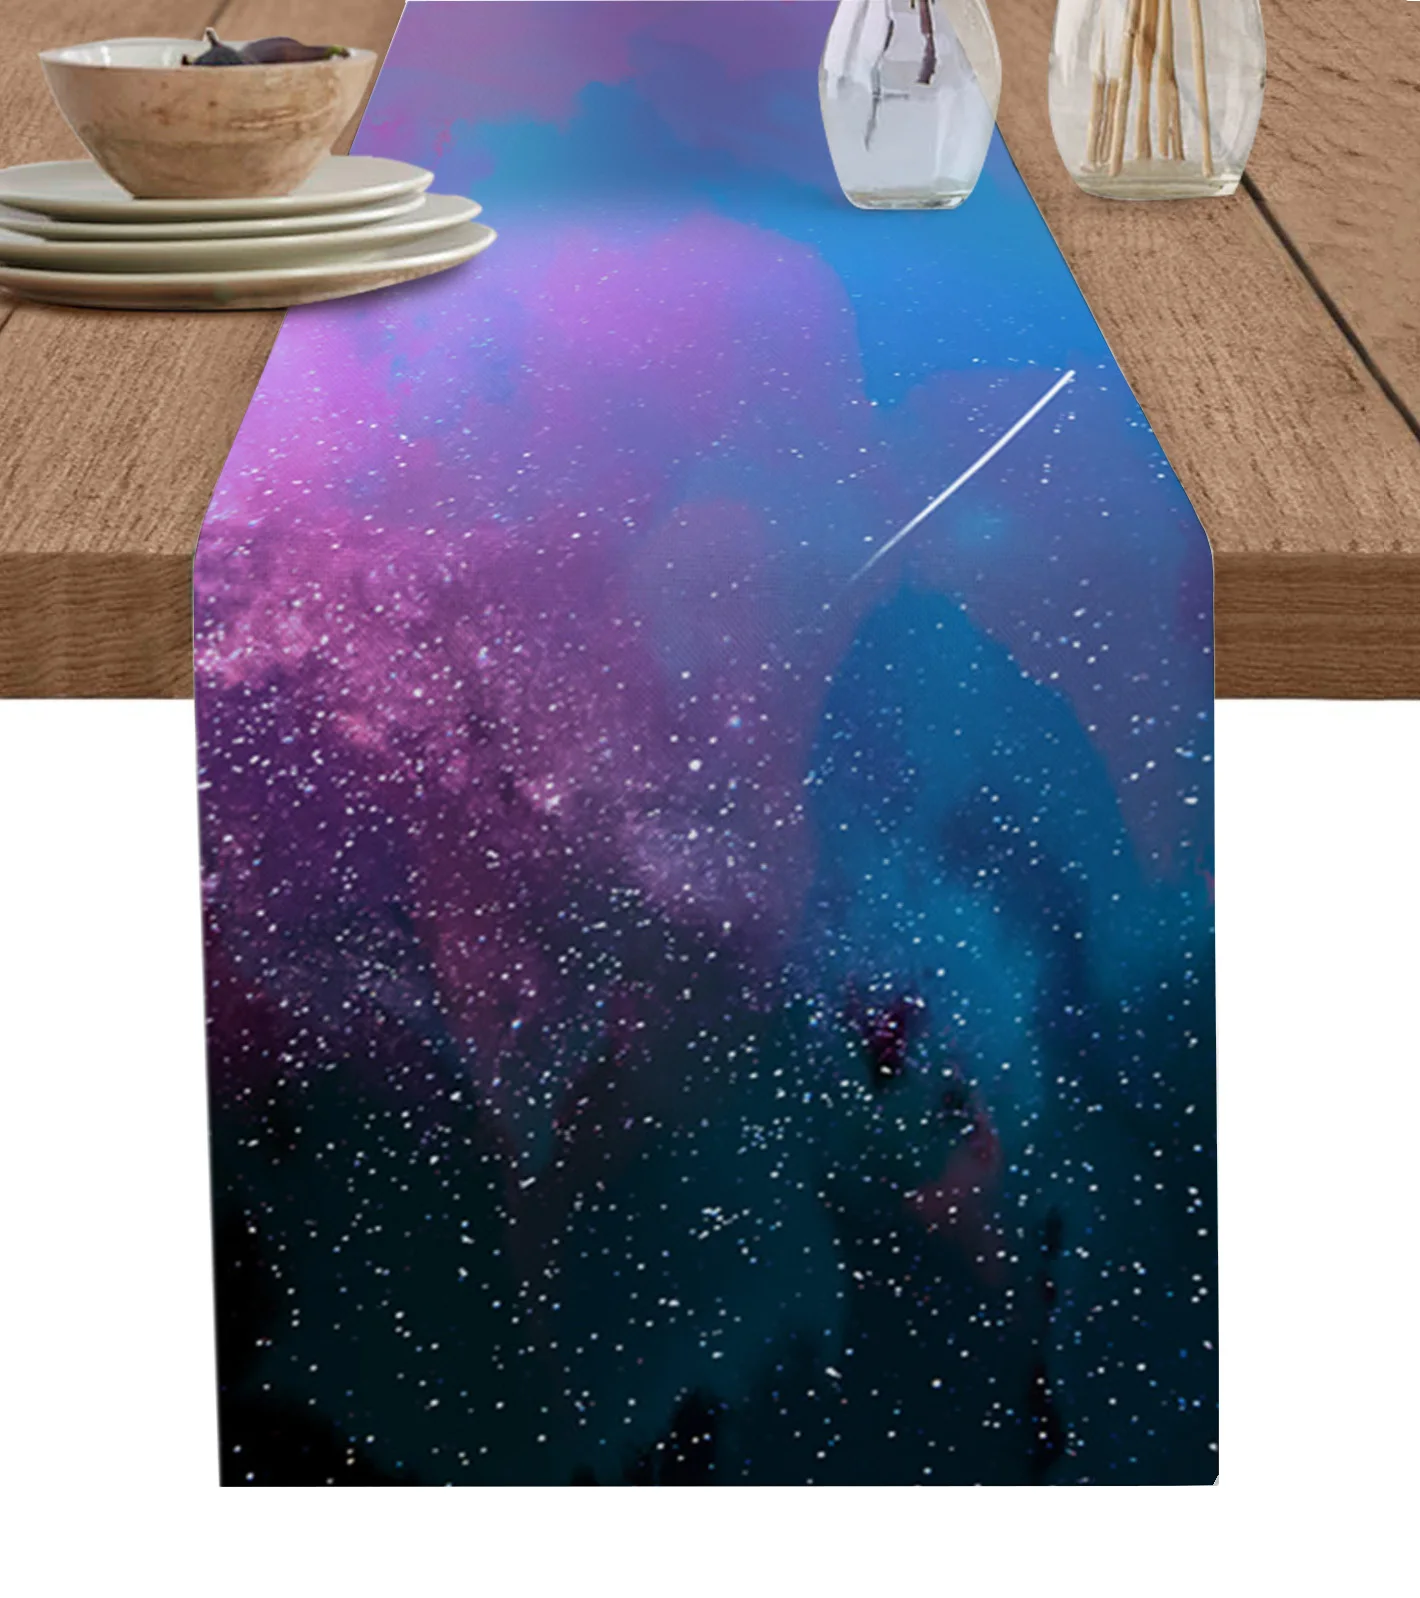 

Sky Clouds Night Sky Table Runner luxury Kitchen Dinner Table Cover Wedding Party Decor Cotton Linen Tablecloth